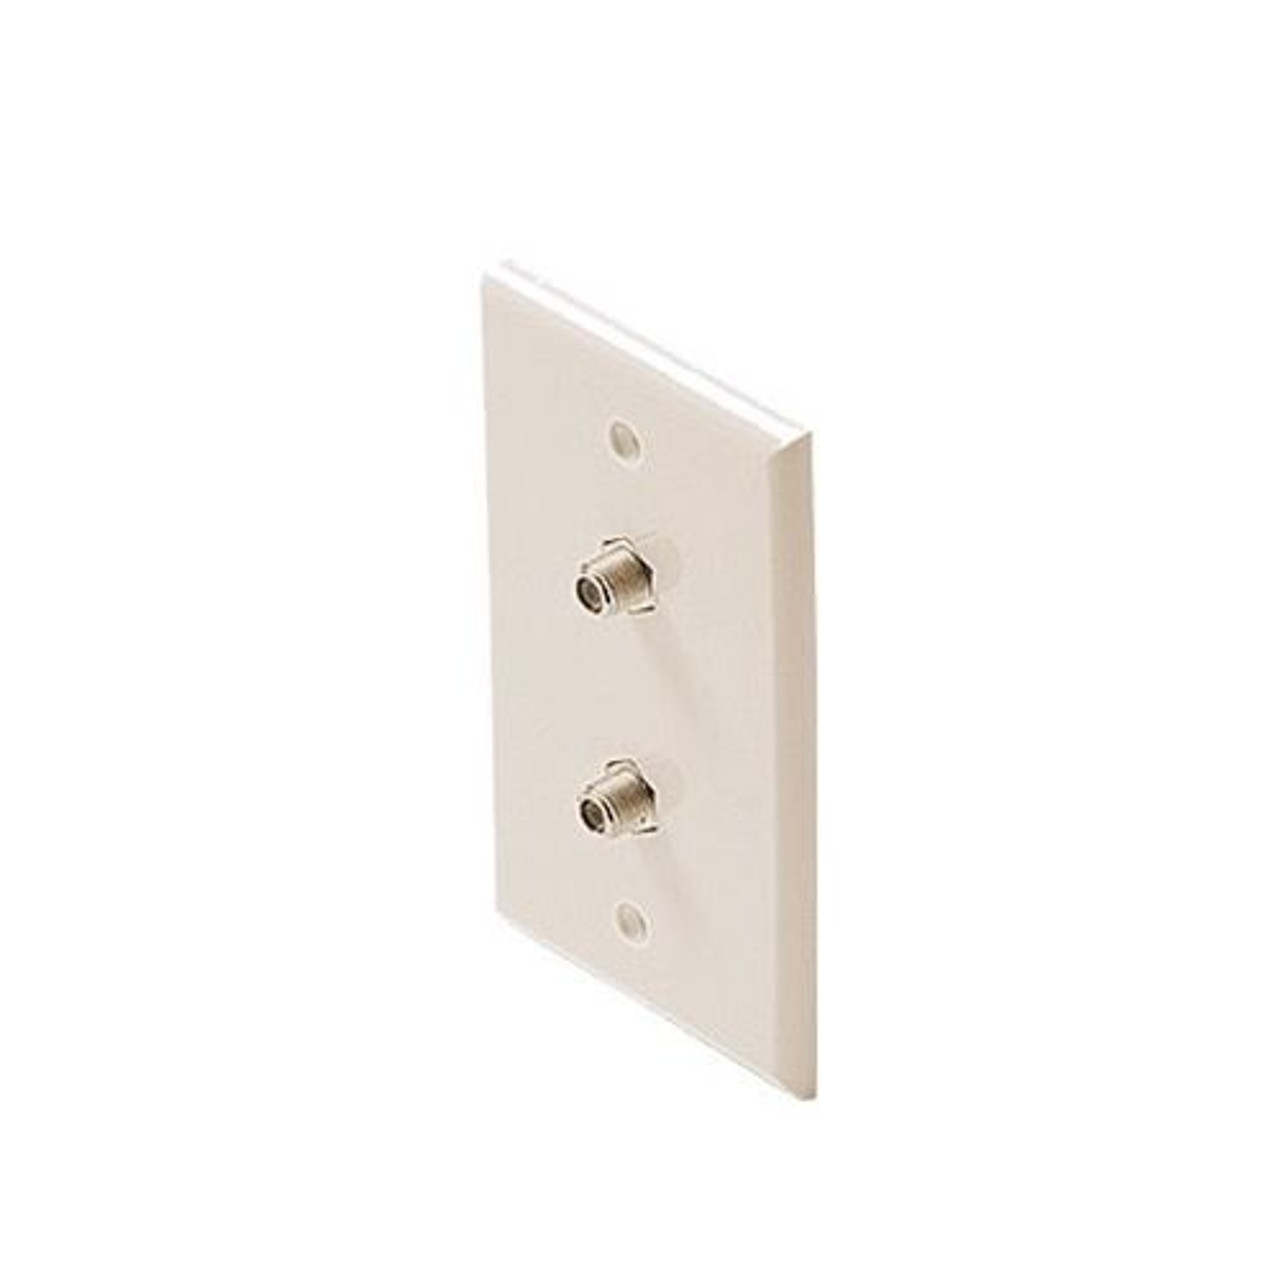 Eagle Wall Plate Dual F Video Jacks Light Almond Coaxial Type TV Female Jacks Light Almond Coax Cable Video HD TV Antenna 75 Ohm Signal Plug Connector Flush Mount Outlet 2 Port Cover